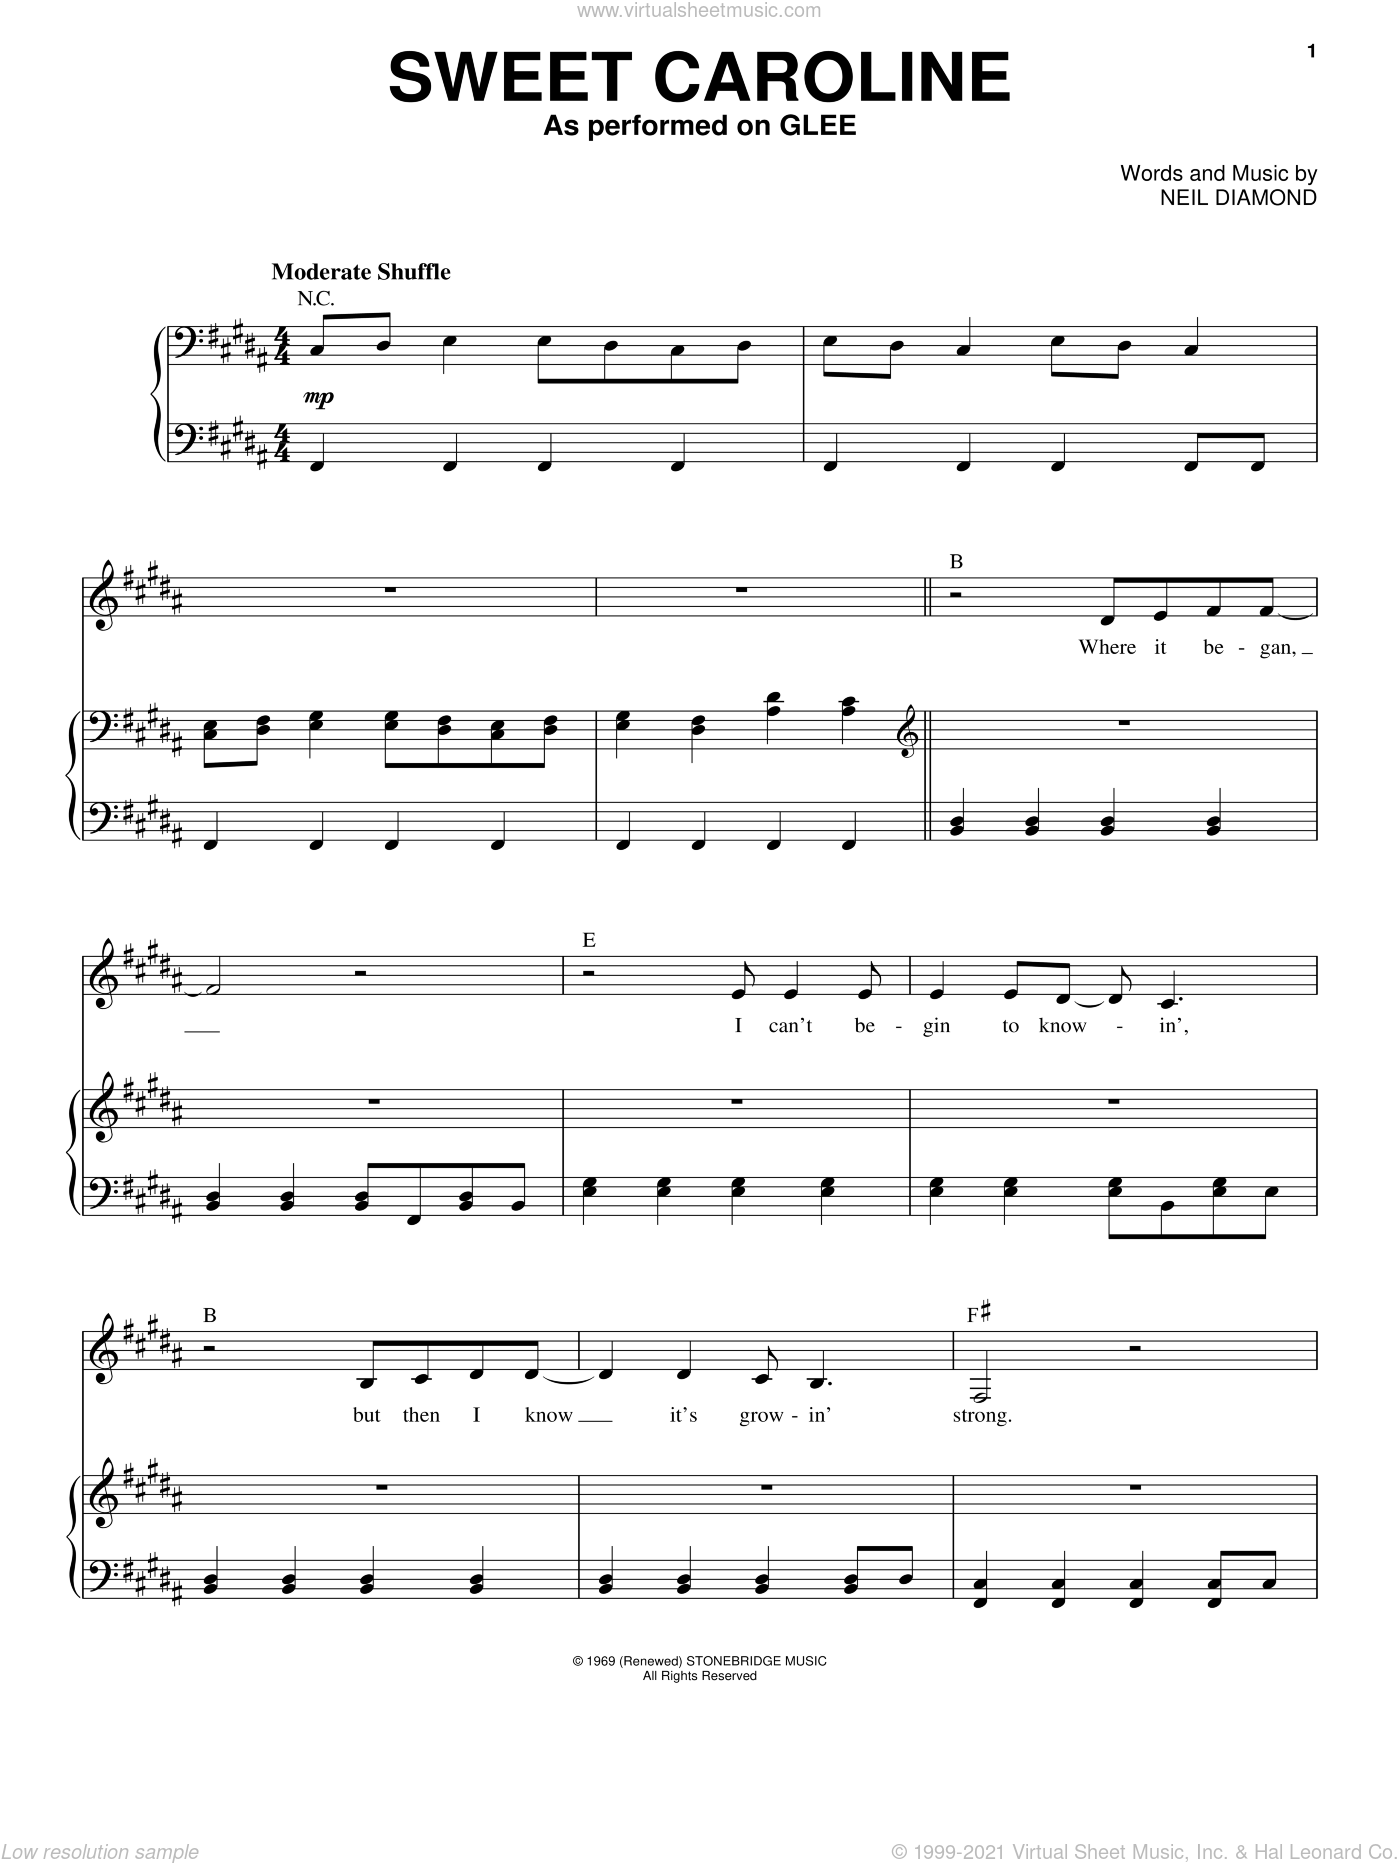 Cast - Sweet Caroline sheet music for voice and piano [PDF]